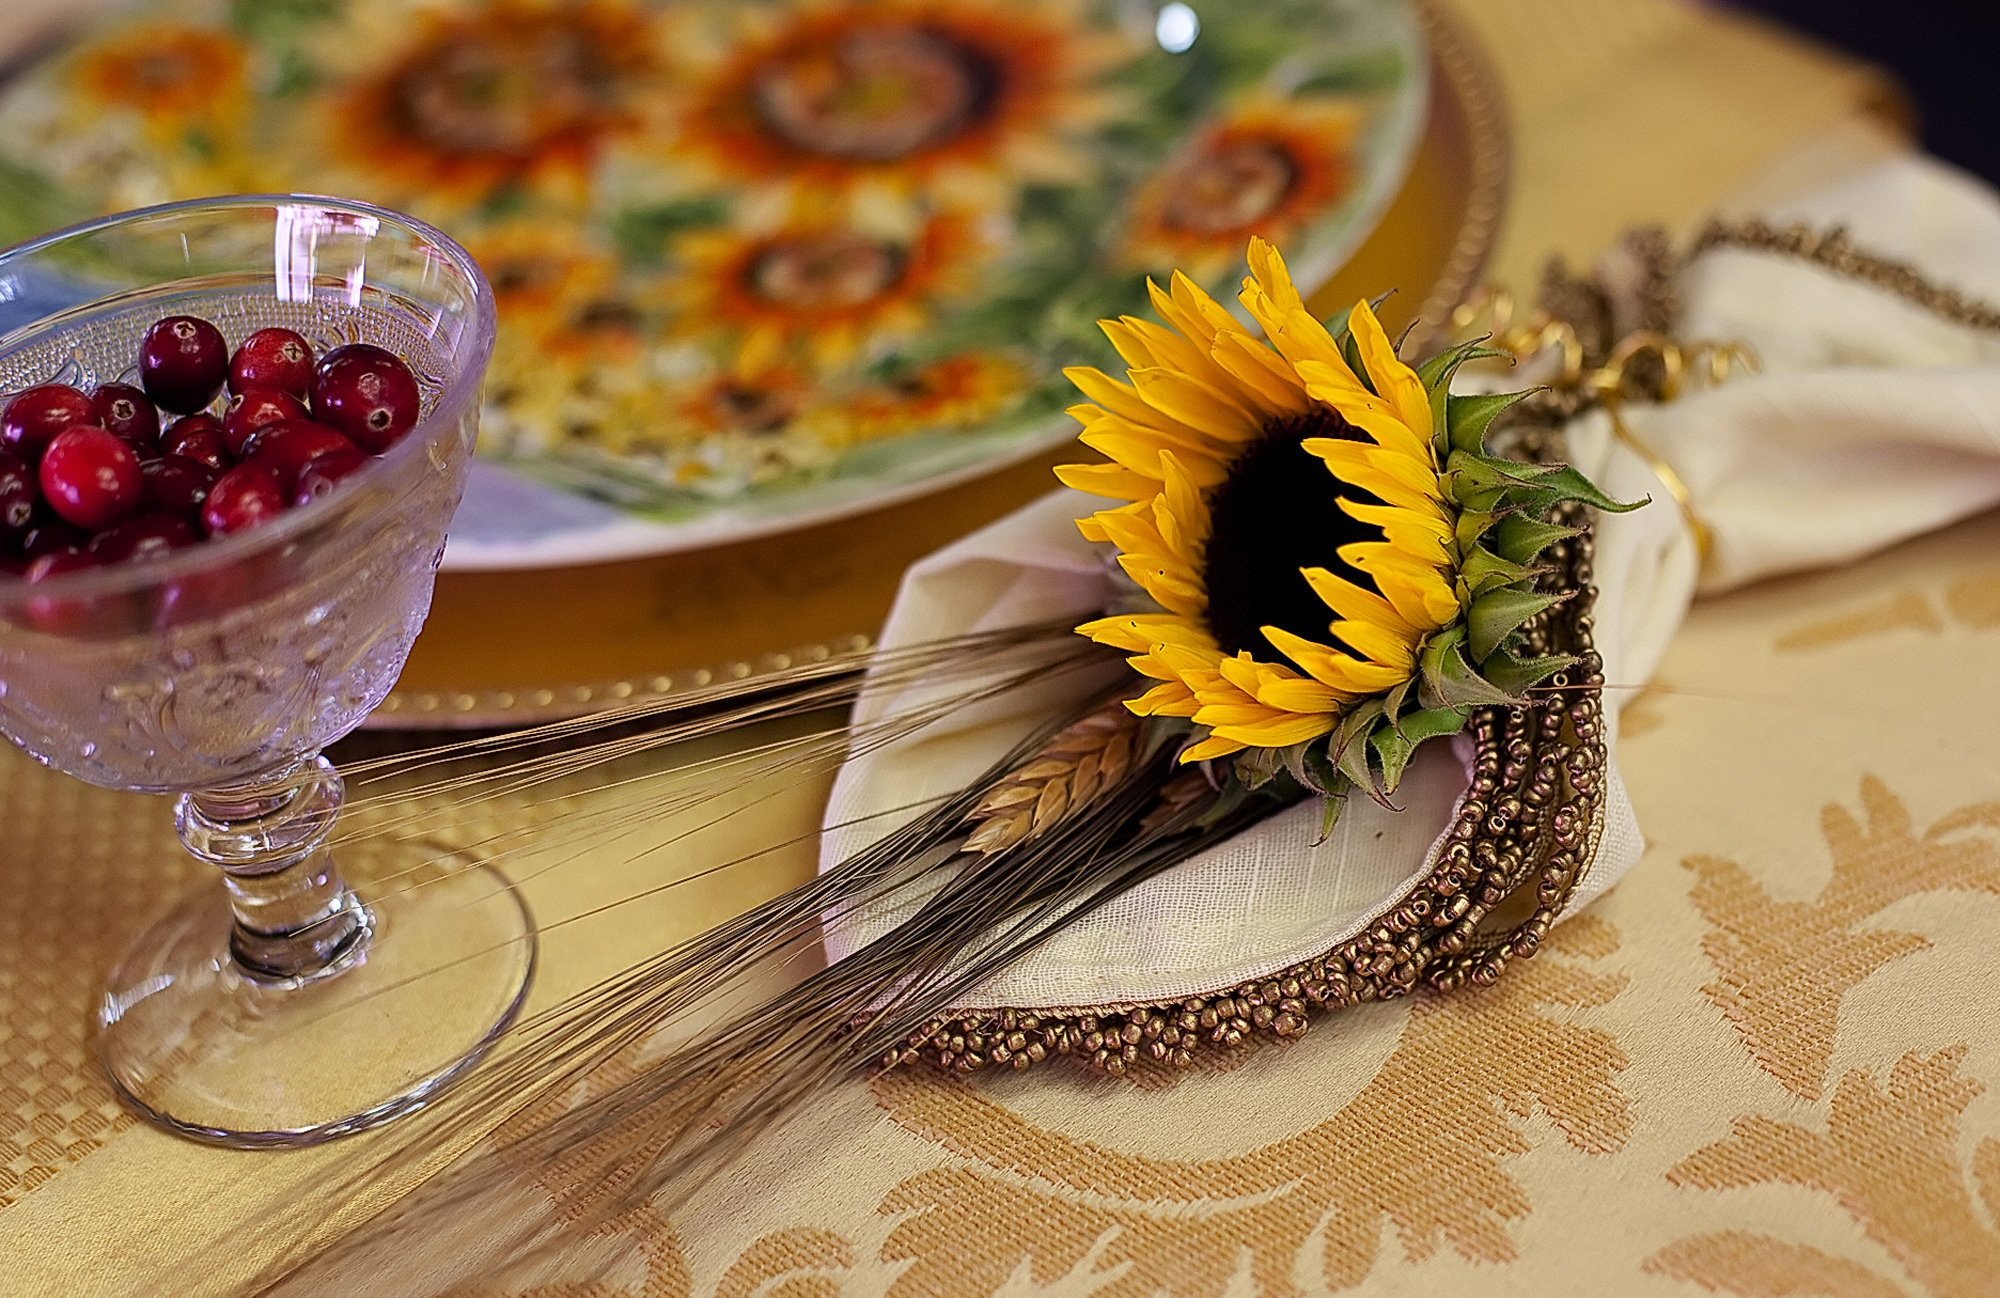 2. Table Decorations